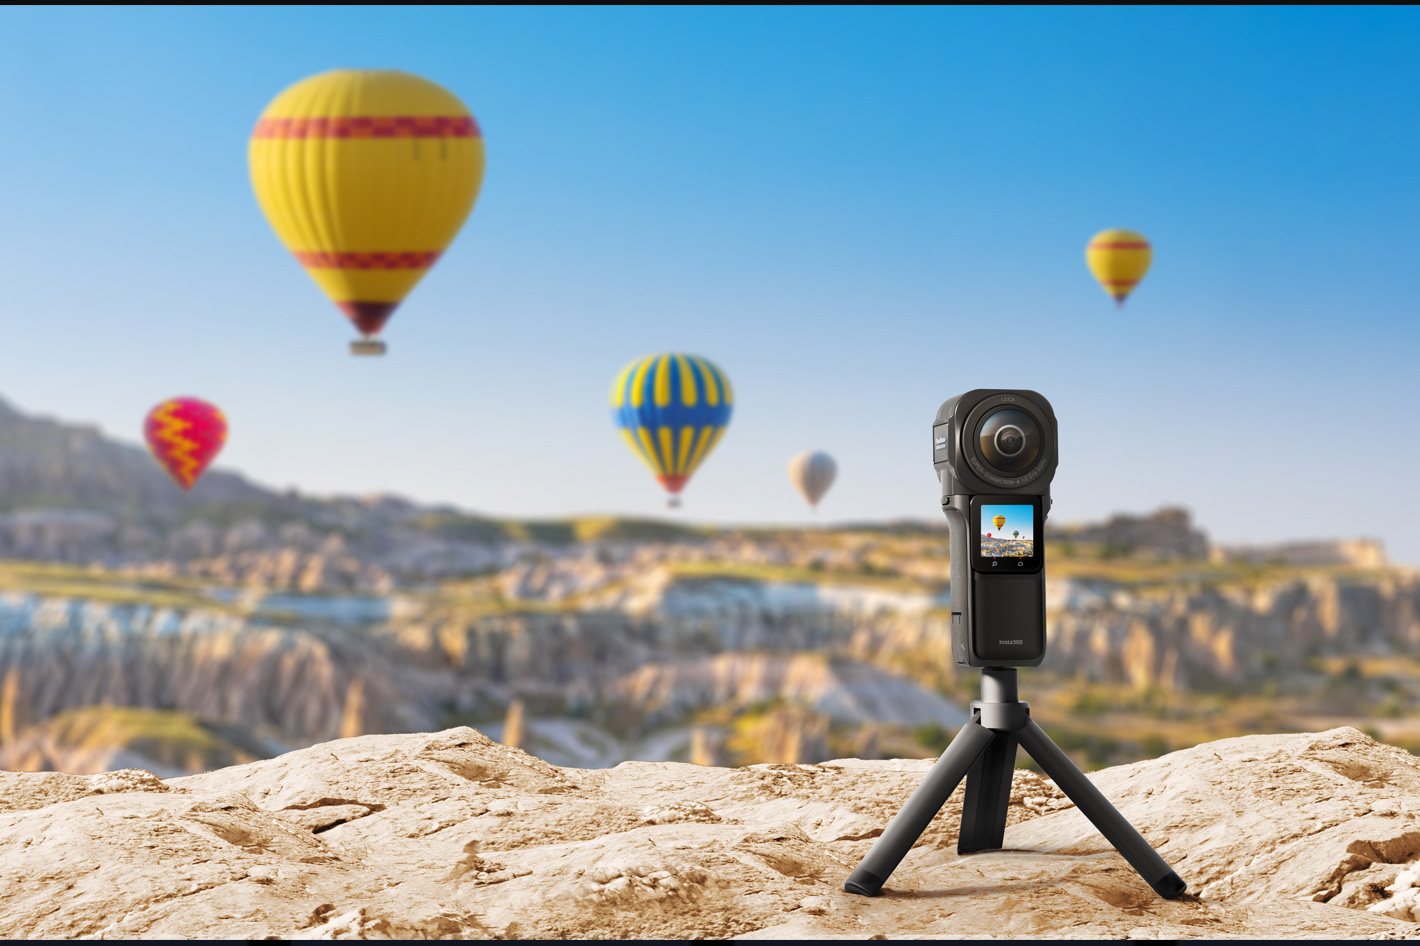 Insta360: first 360 camera co-engineered with Leica